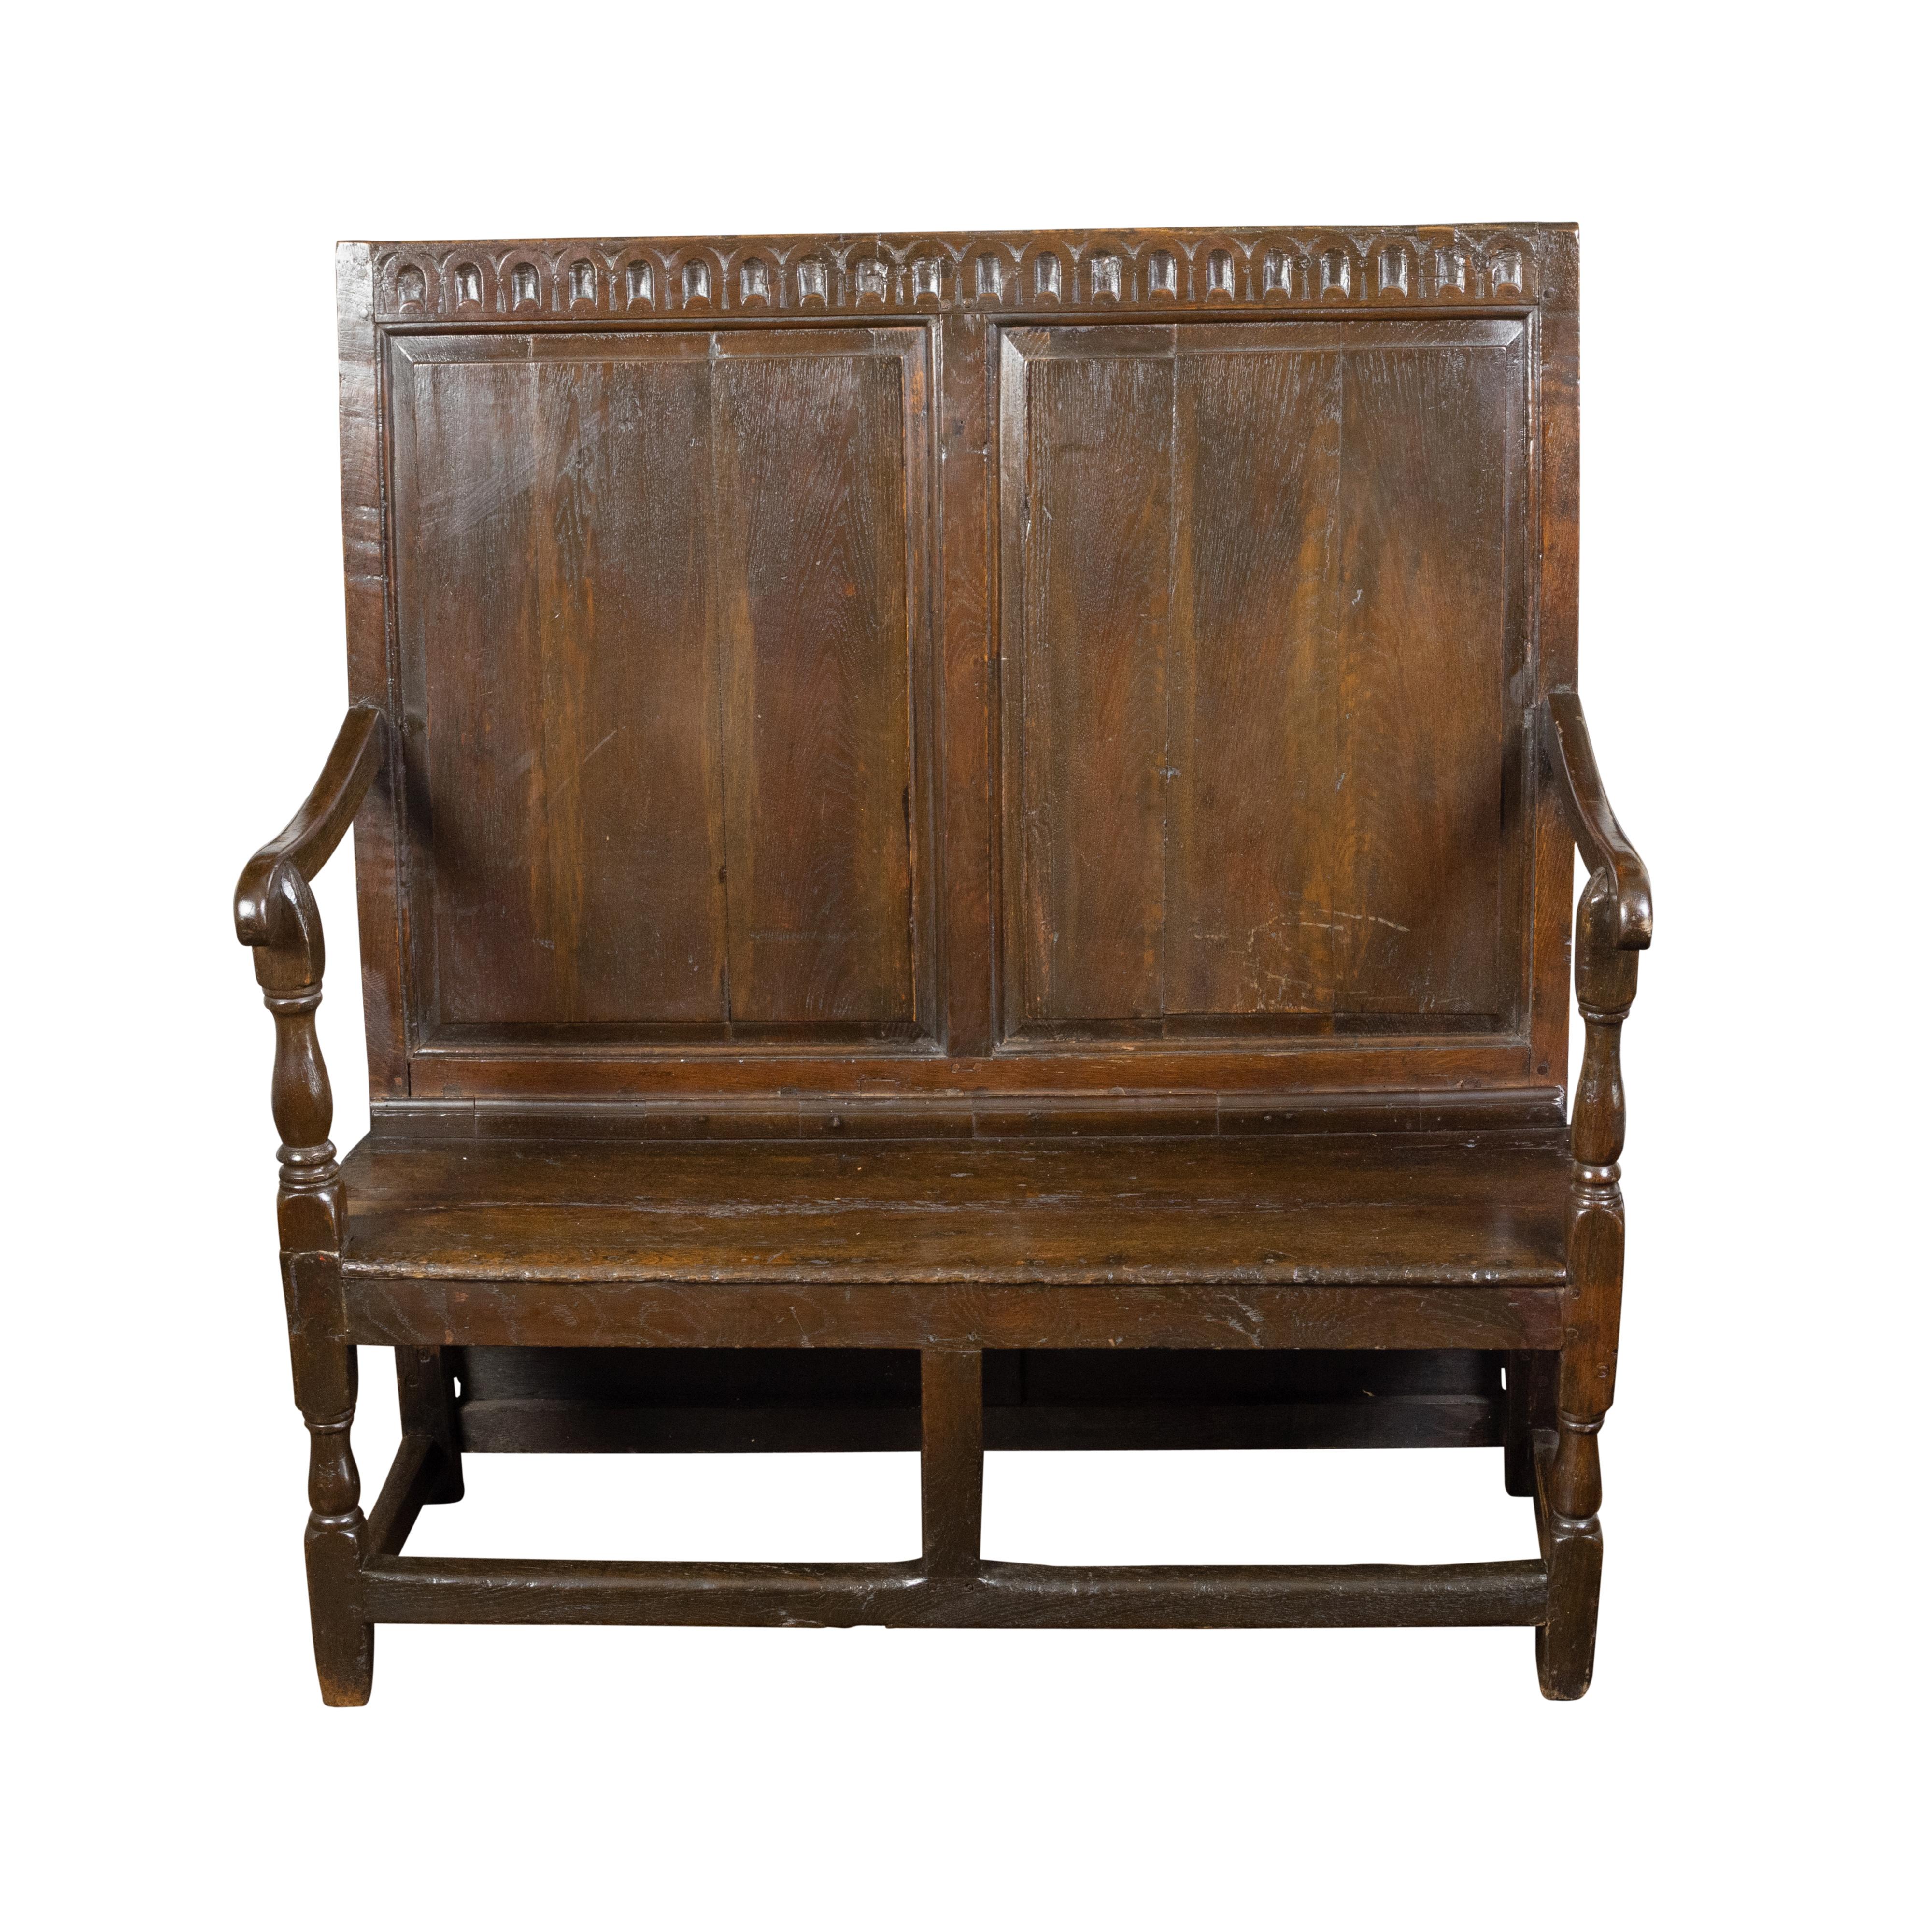 English 1870s Oak Bench with Carved Frieze, Scrolling Arms and Turned Legs